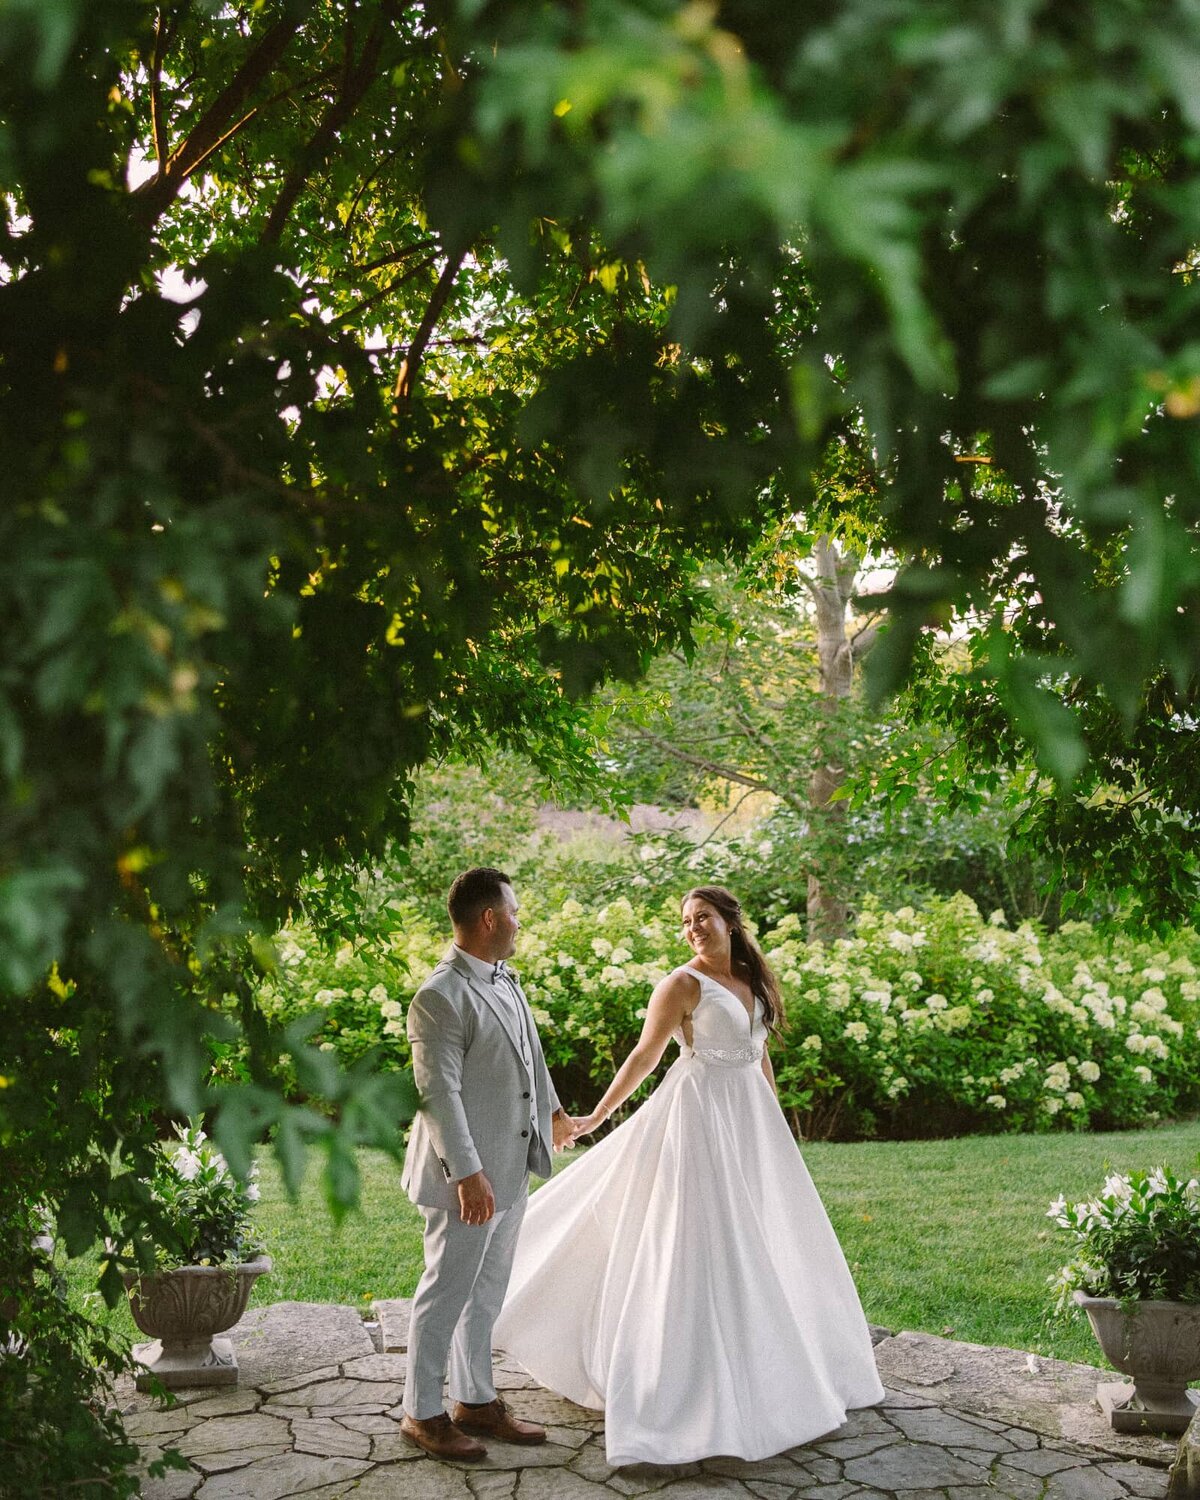 married couple dancing together in a garden